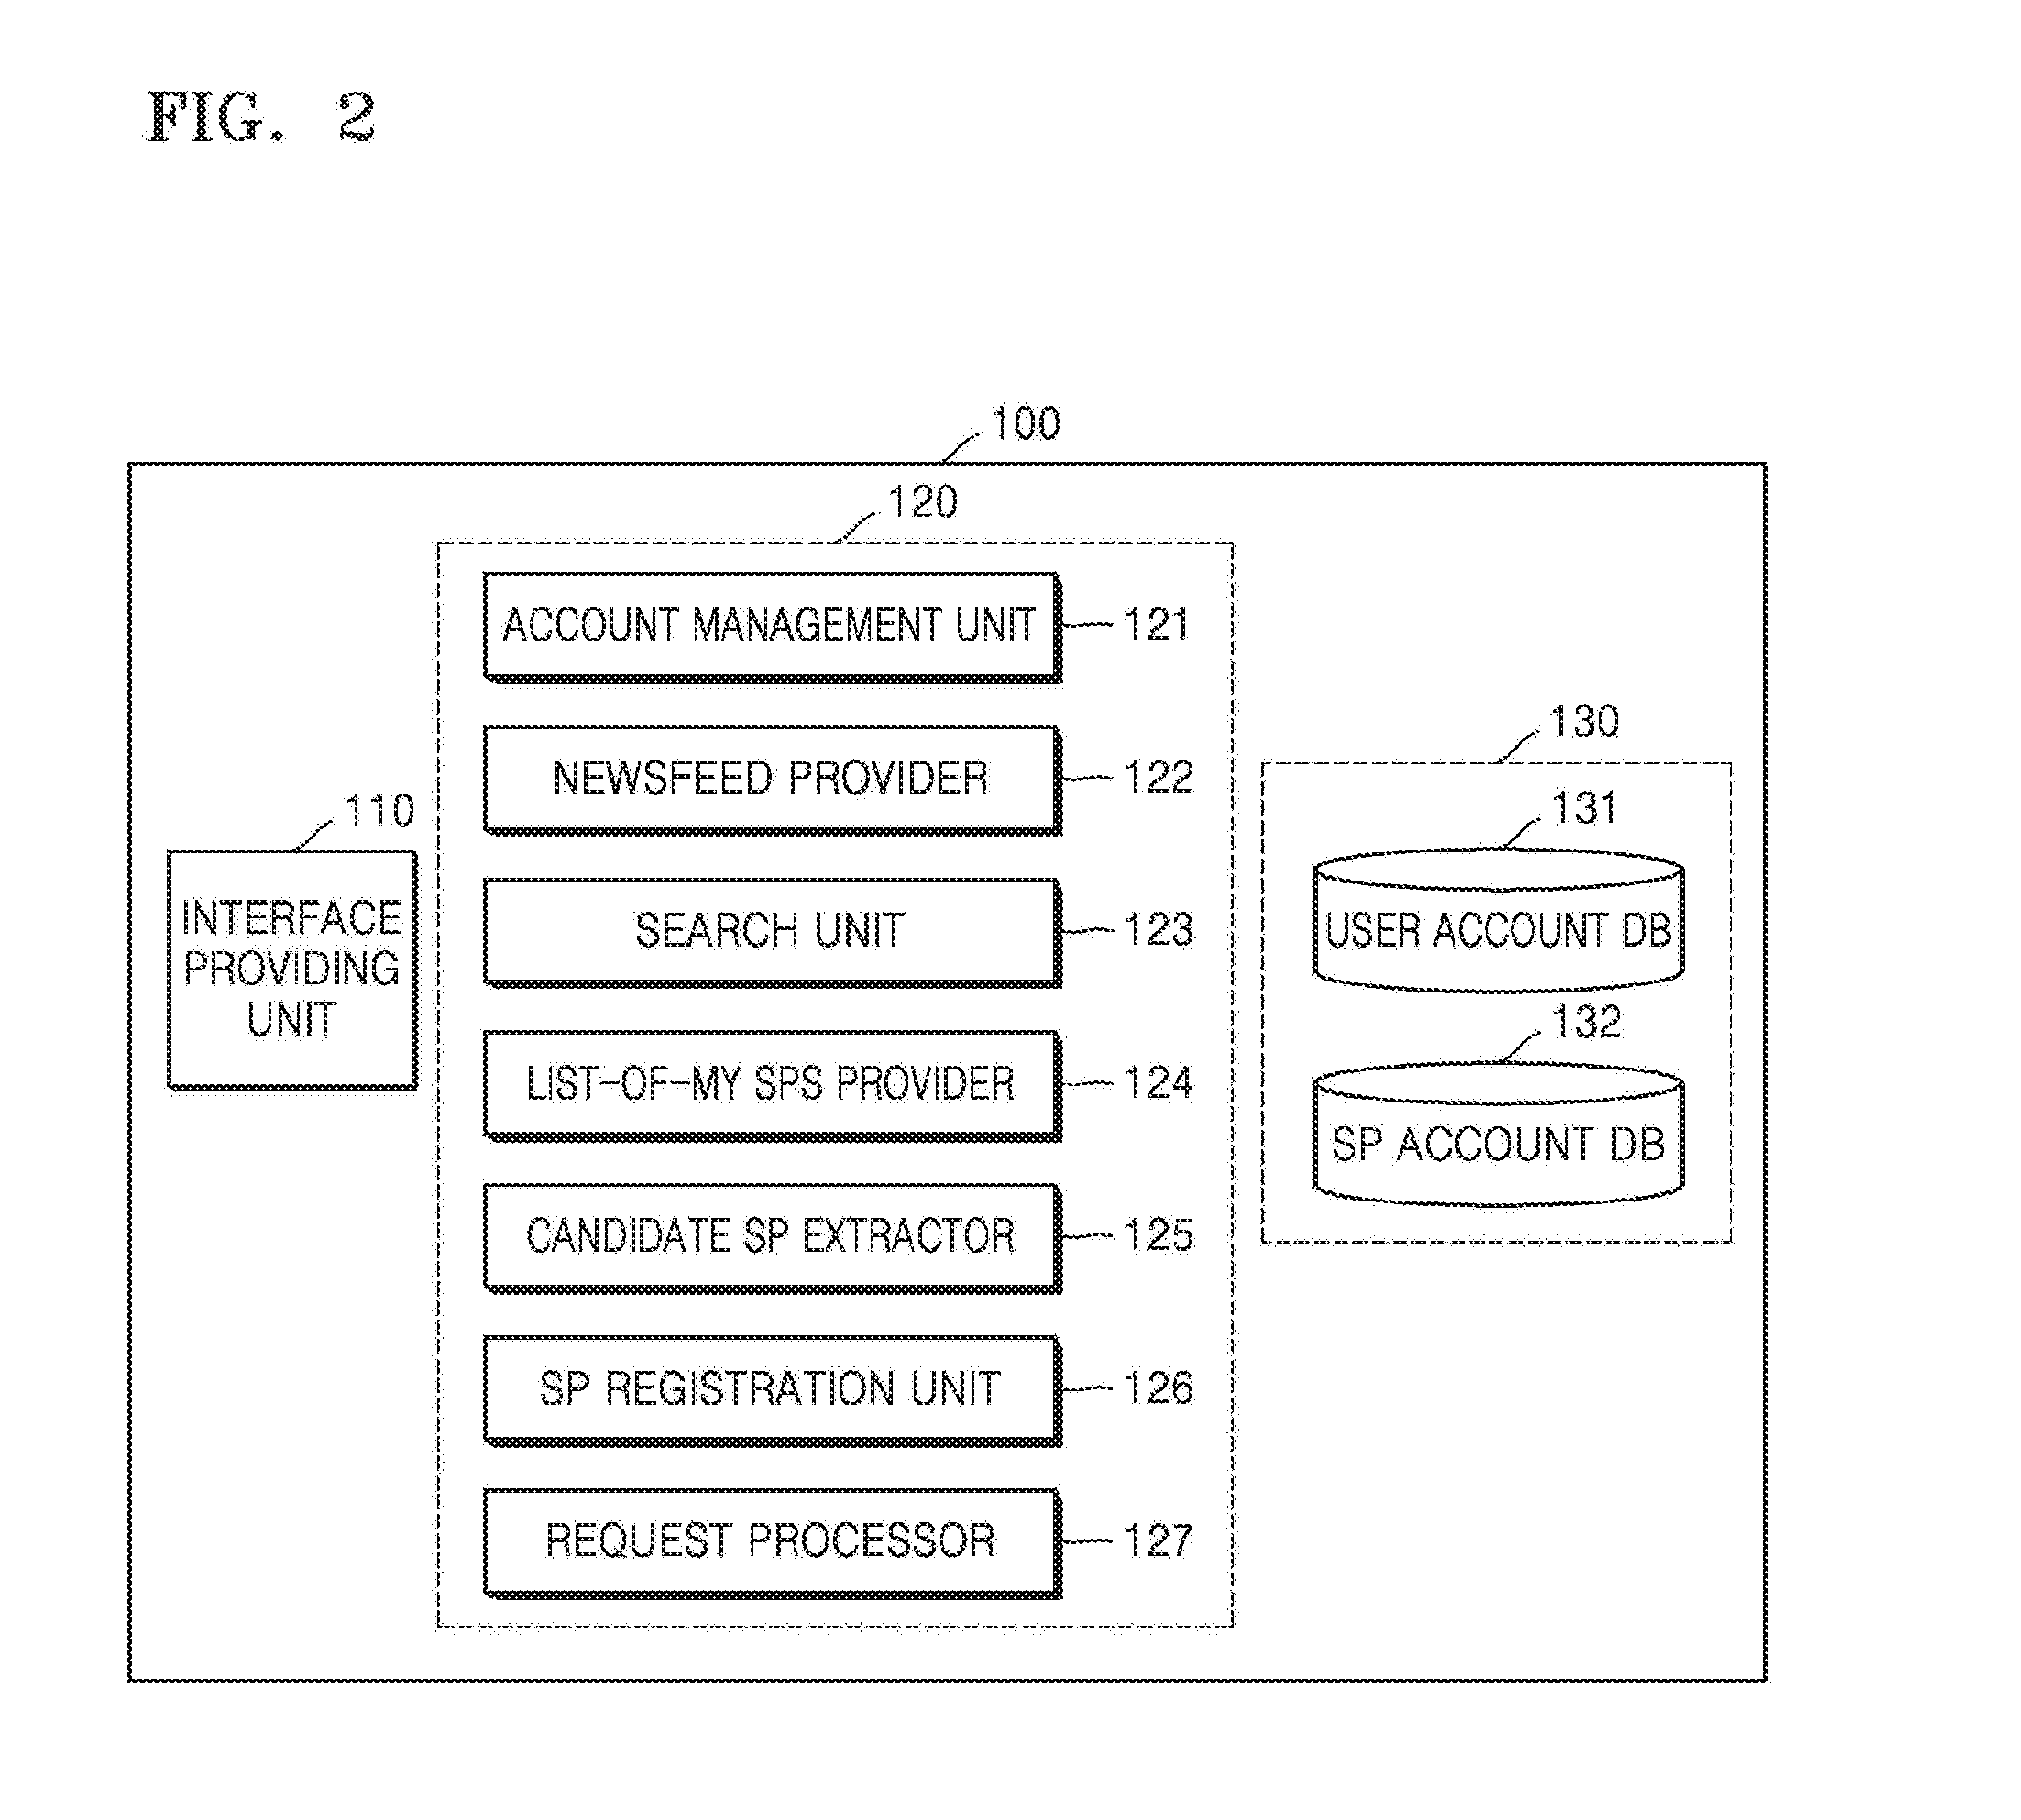 Apparatus and method for providing social network service